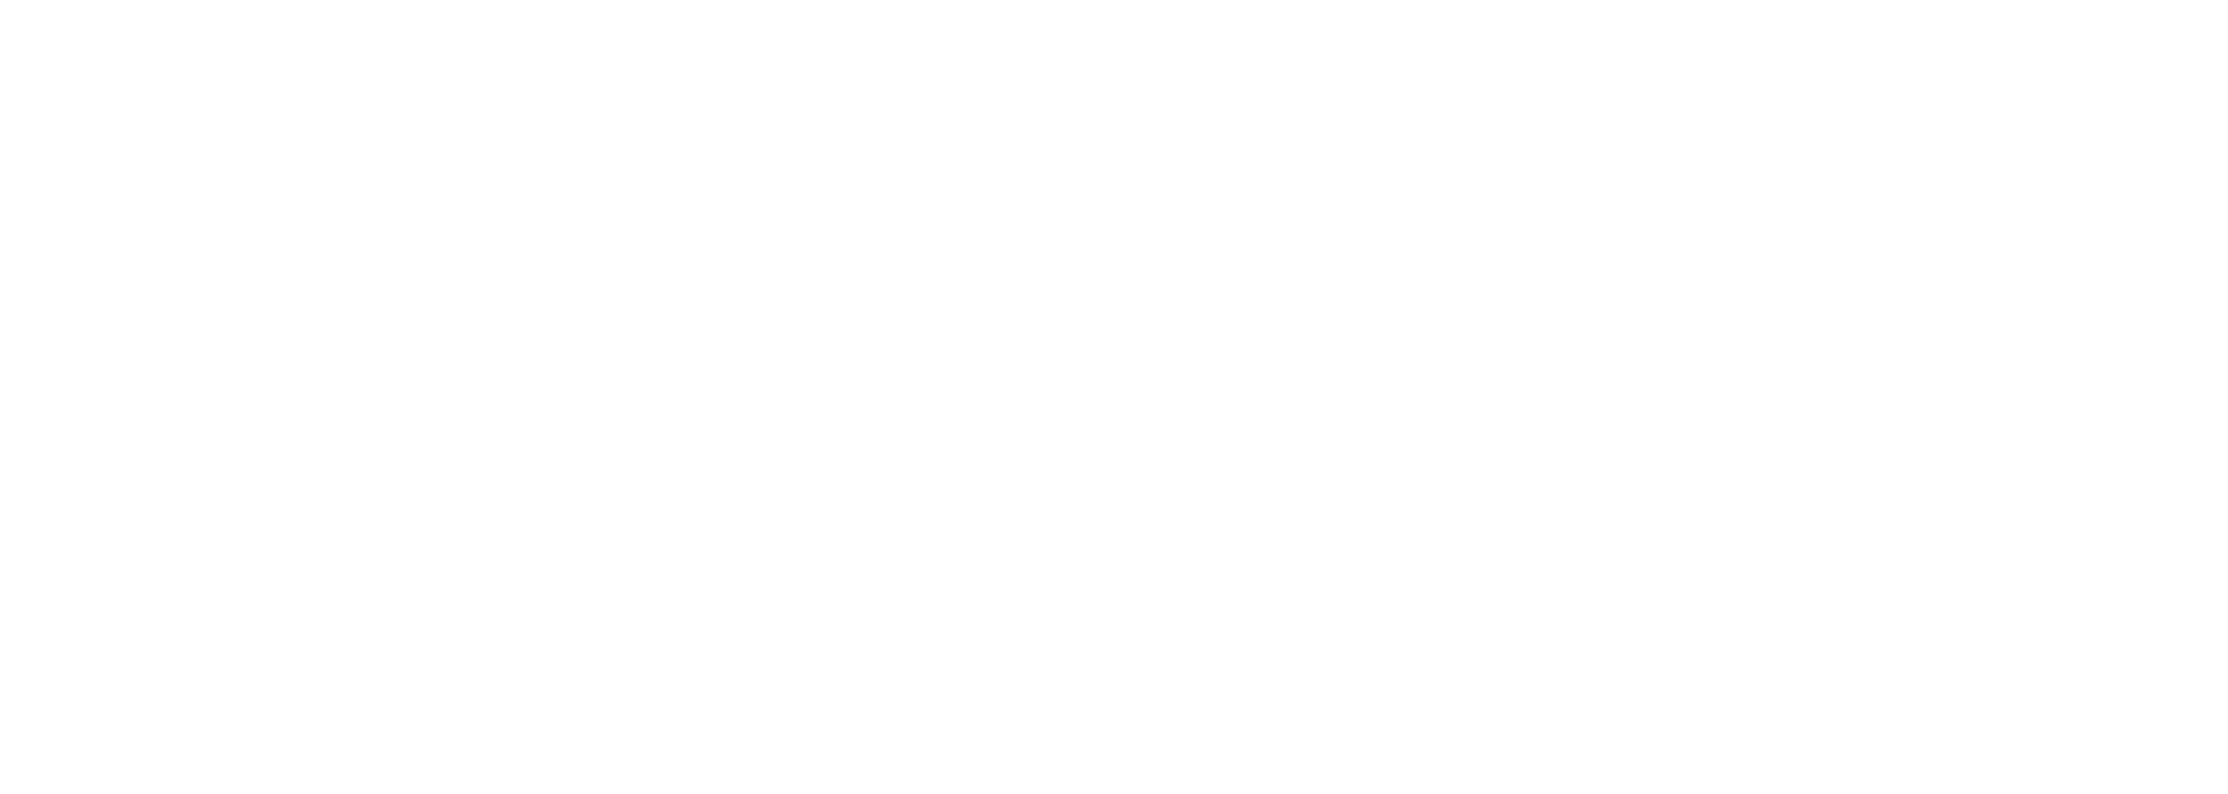 Nvidia Deep Learning Institute